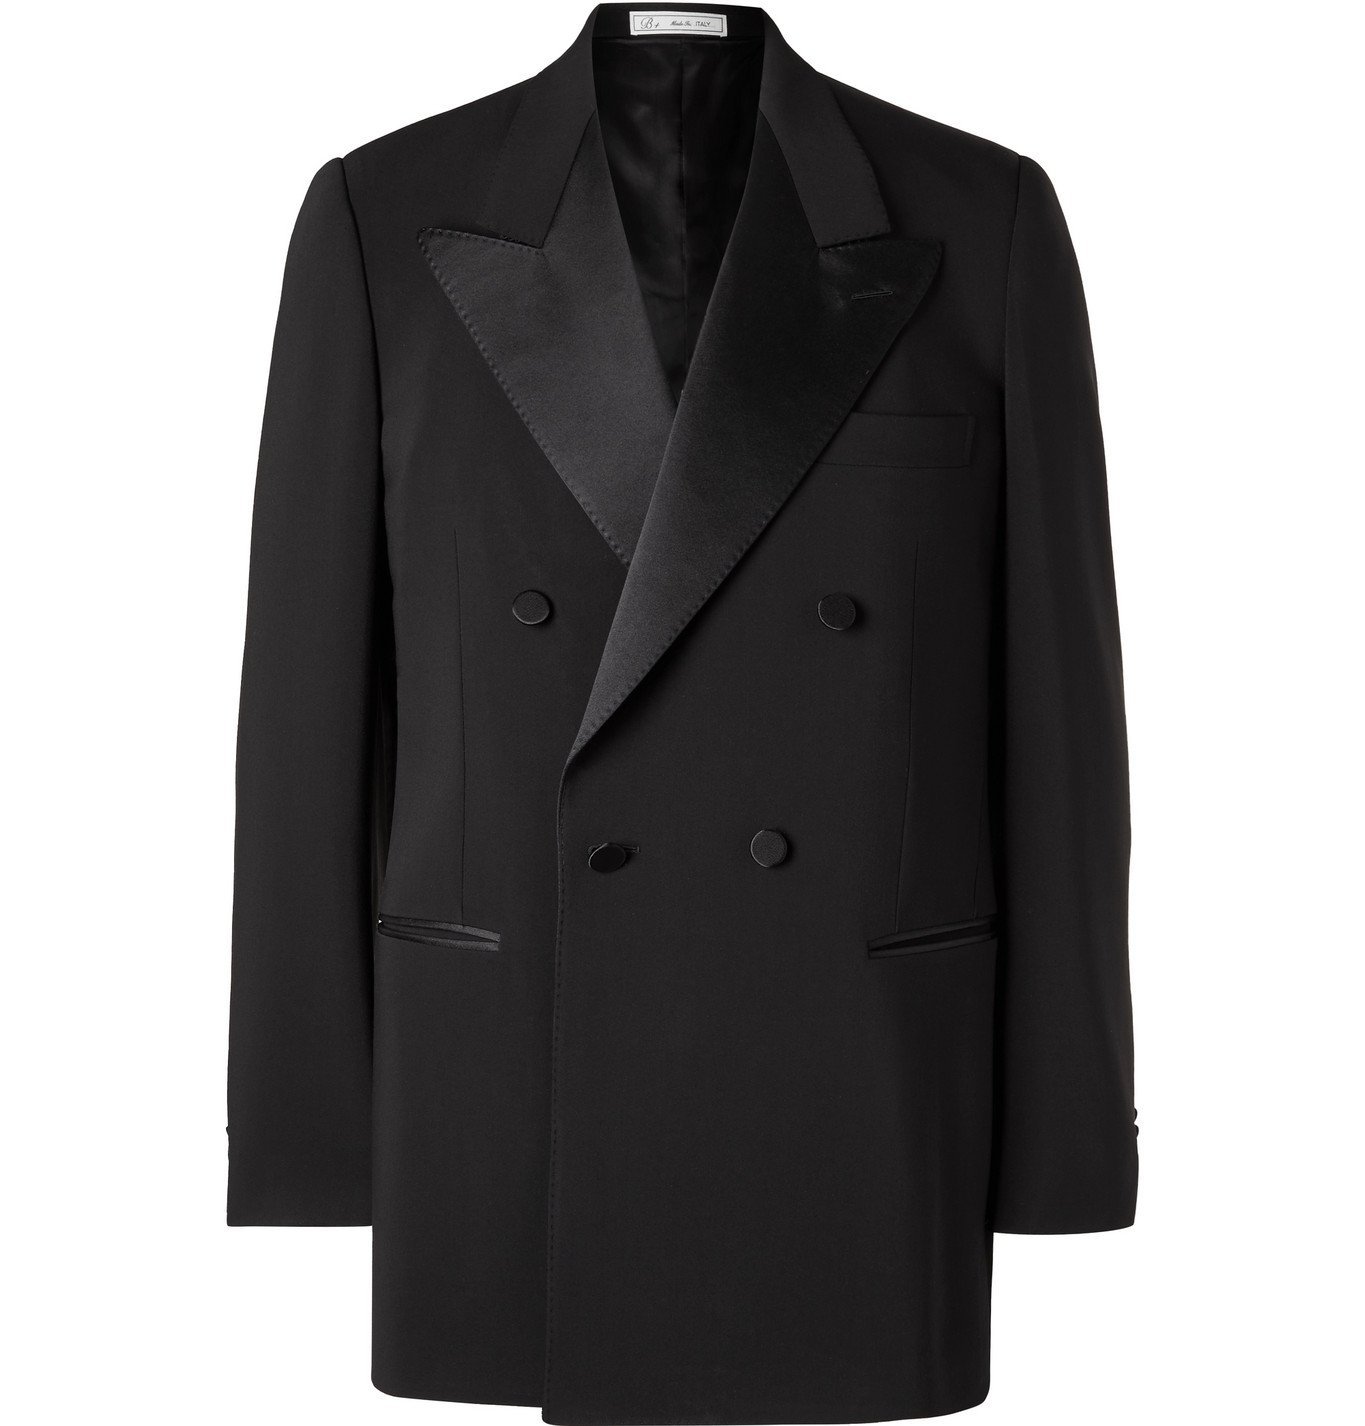 UMIT BENAN B - Double-Breasted Satin-Trimmed Wool-Blend Tuxedo Jacket ...